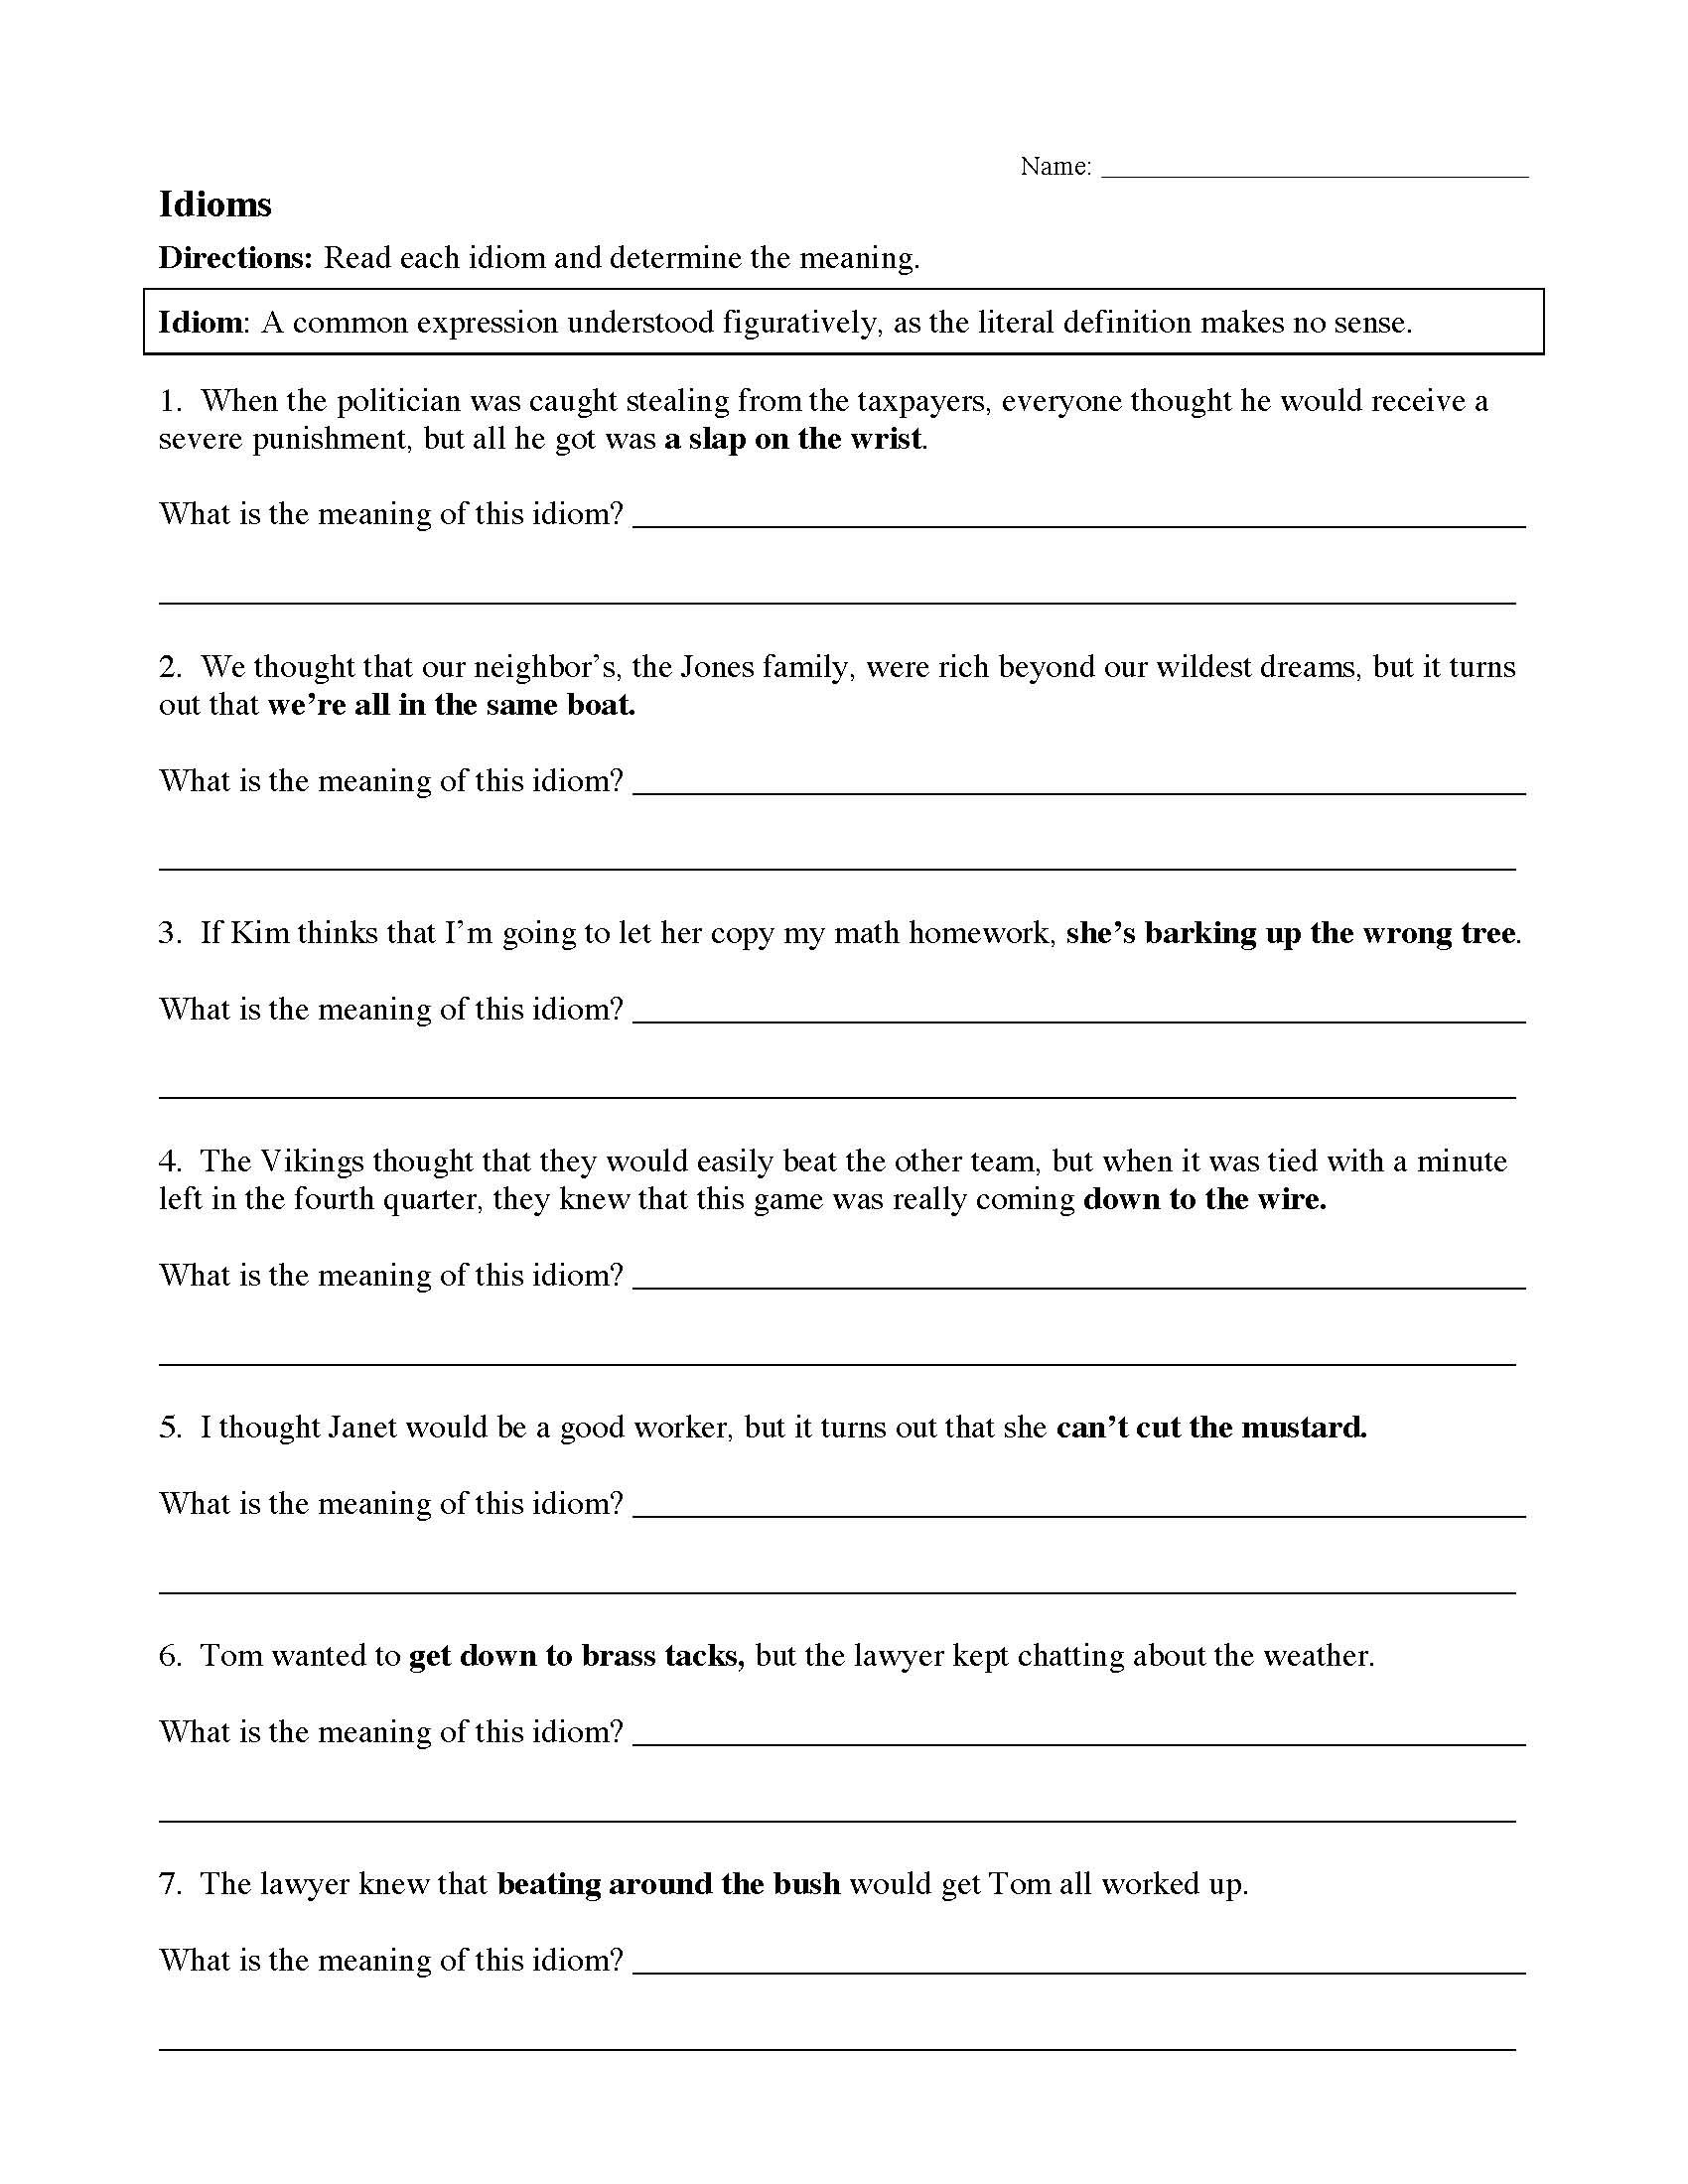 This is a preview image of Idiom Worksheet 1. Click on it to enlarge it or view the source file.